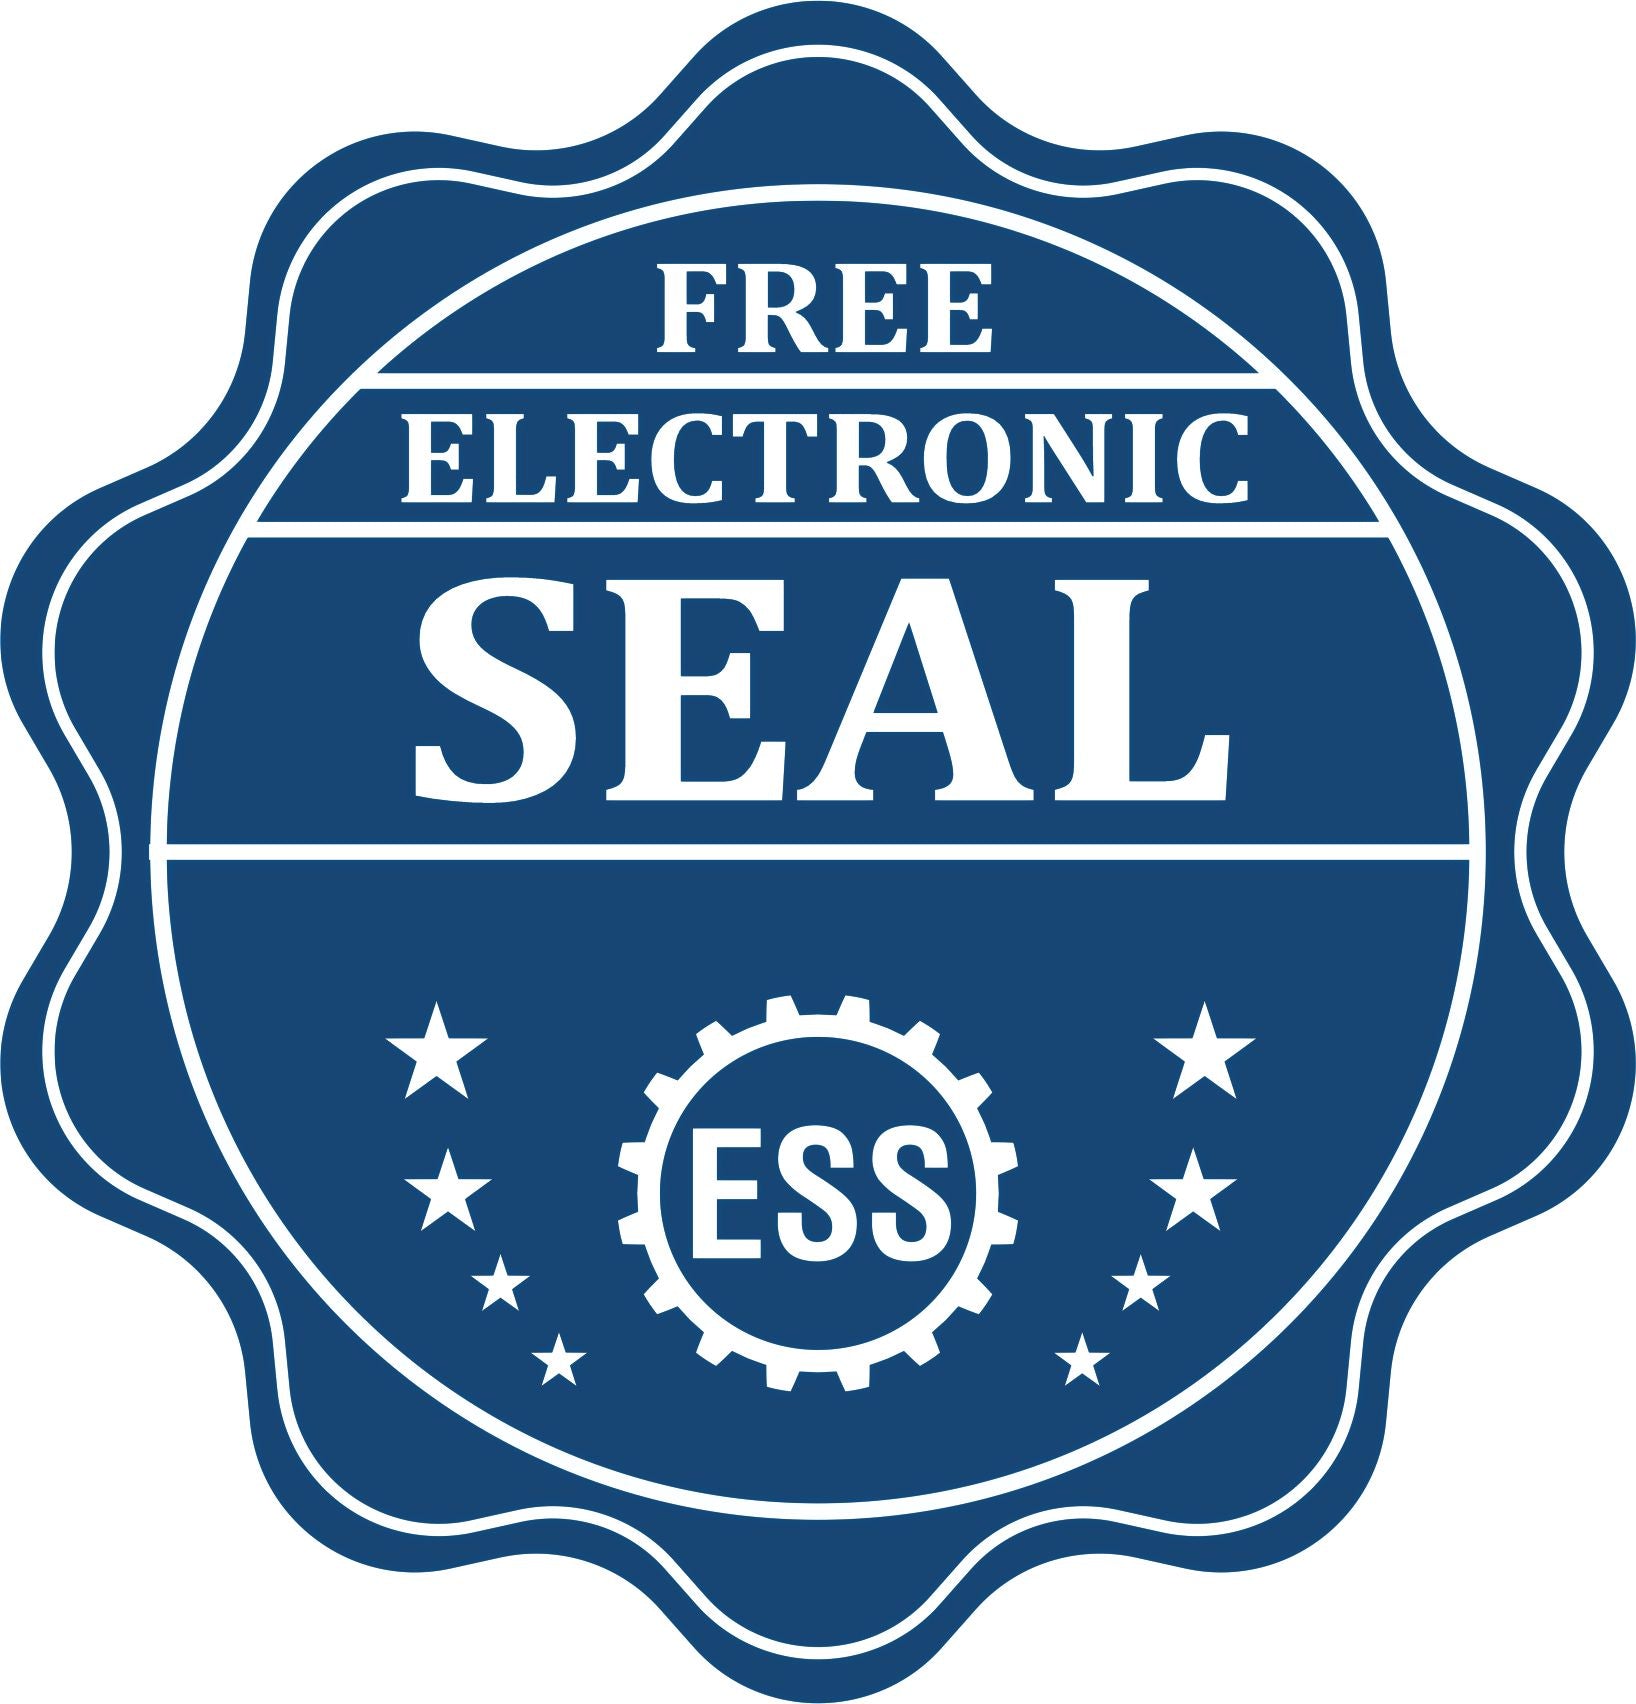 A badge showing a free electronic seal for the Gift Nebraska Land Surveyor Seal with stars and the ESS gear on the emblem.